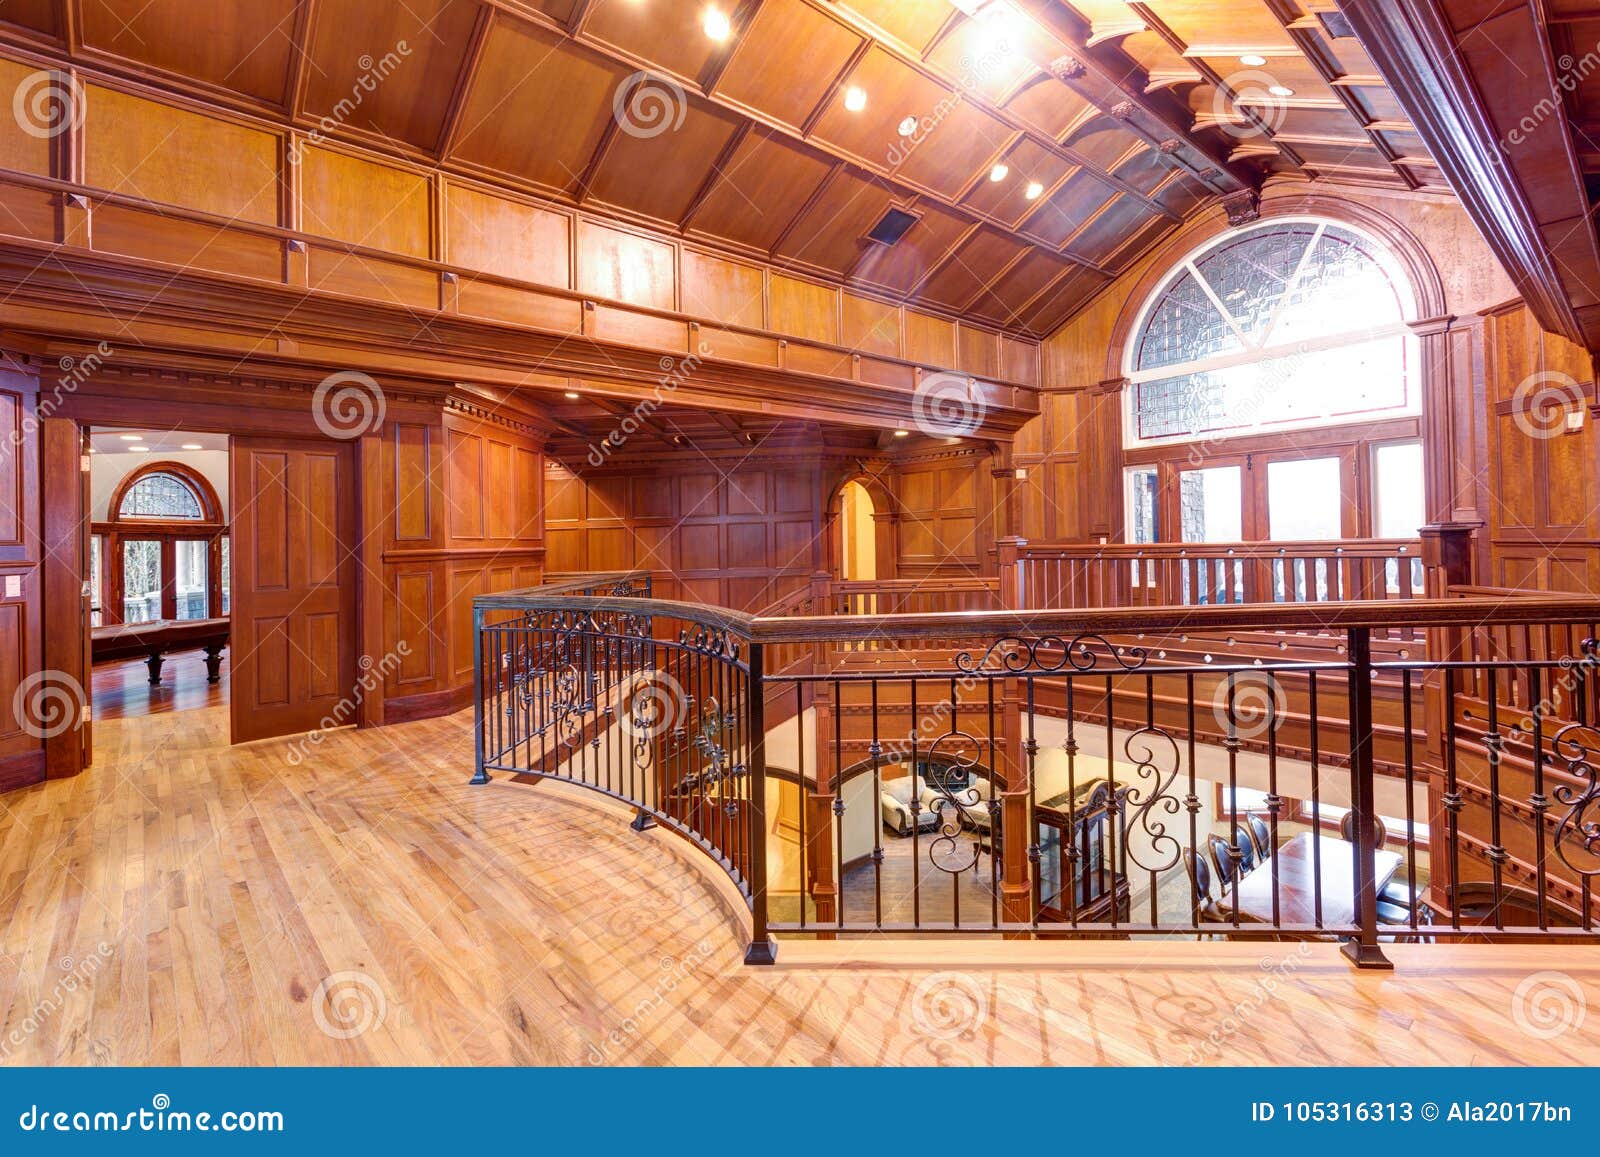 Second Floor Landing Accented With Wood Paneled Walls And